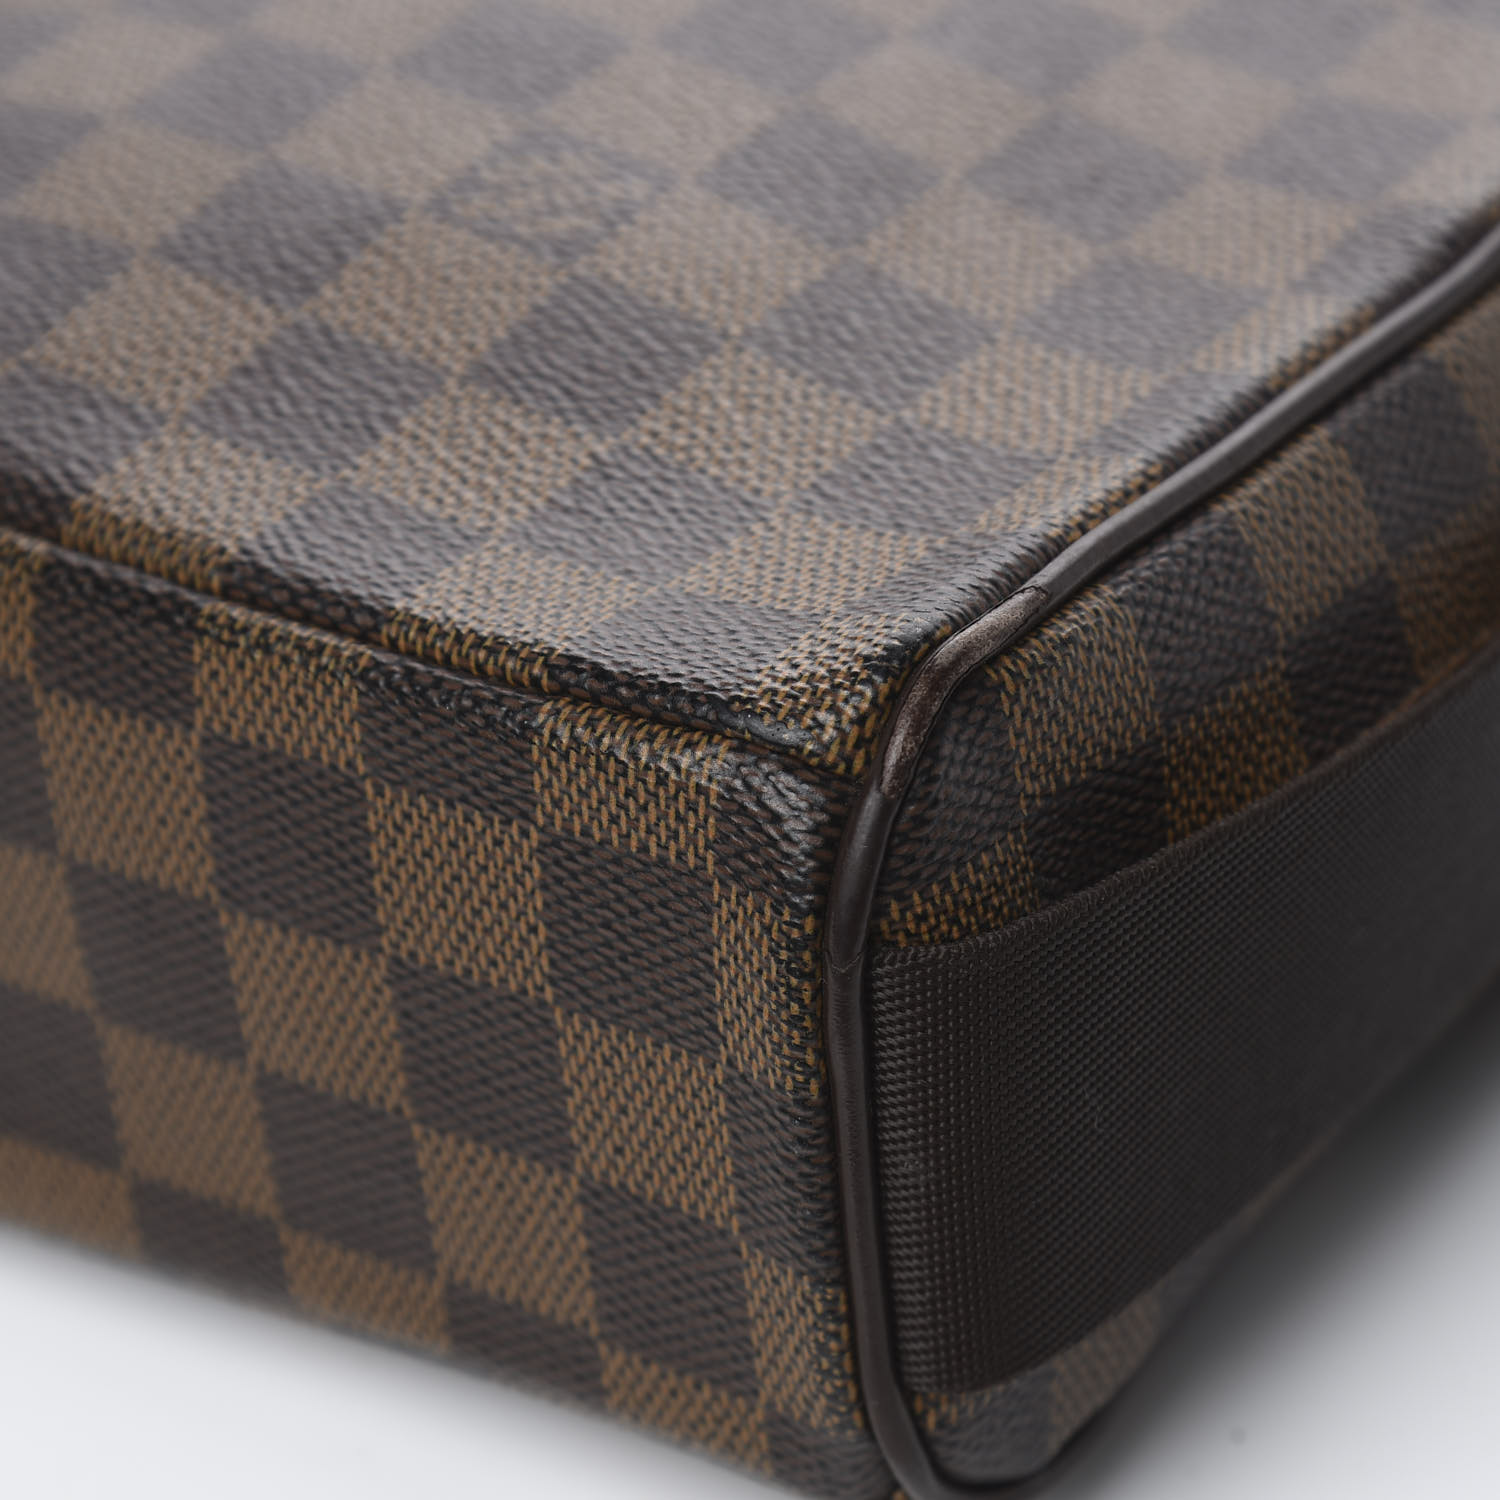 Louis Vuitton 2003 Brown Damier Ebene Soho Backpack For Sale at